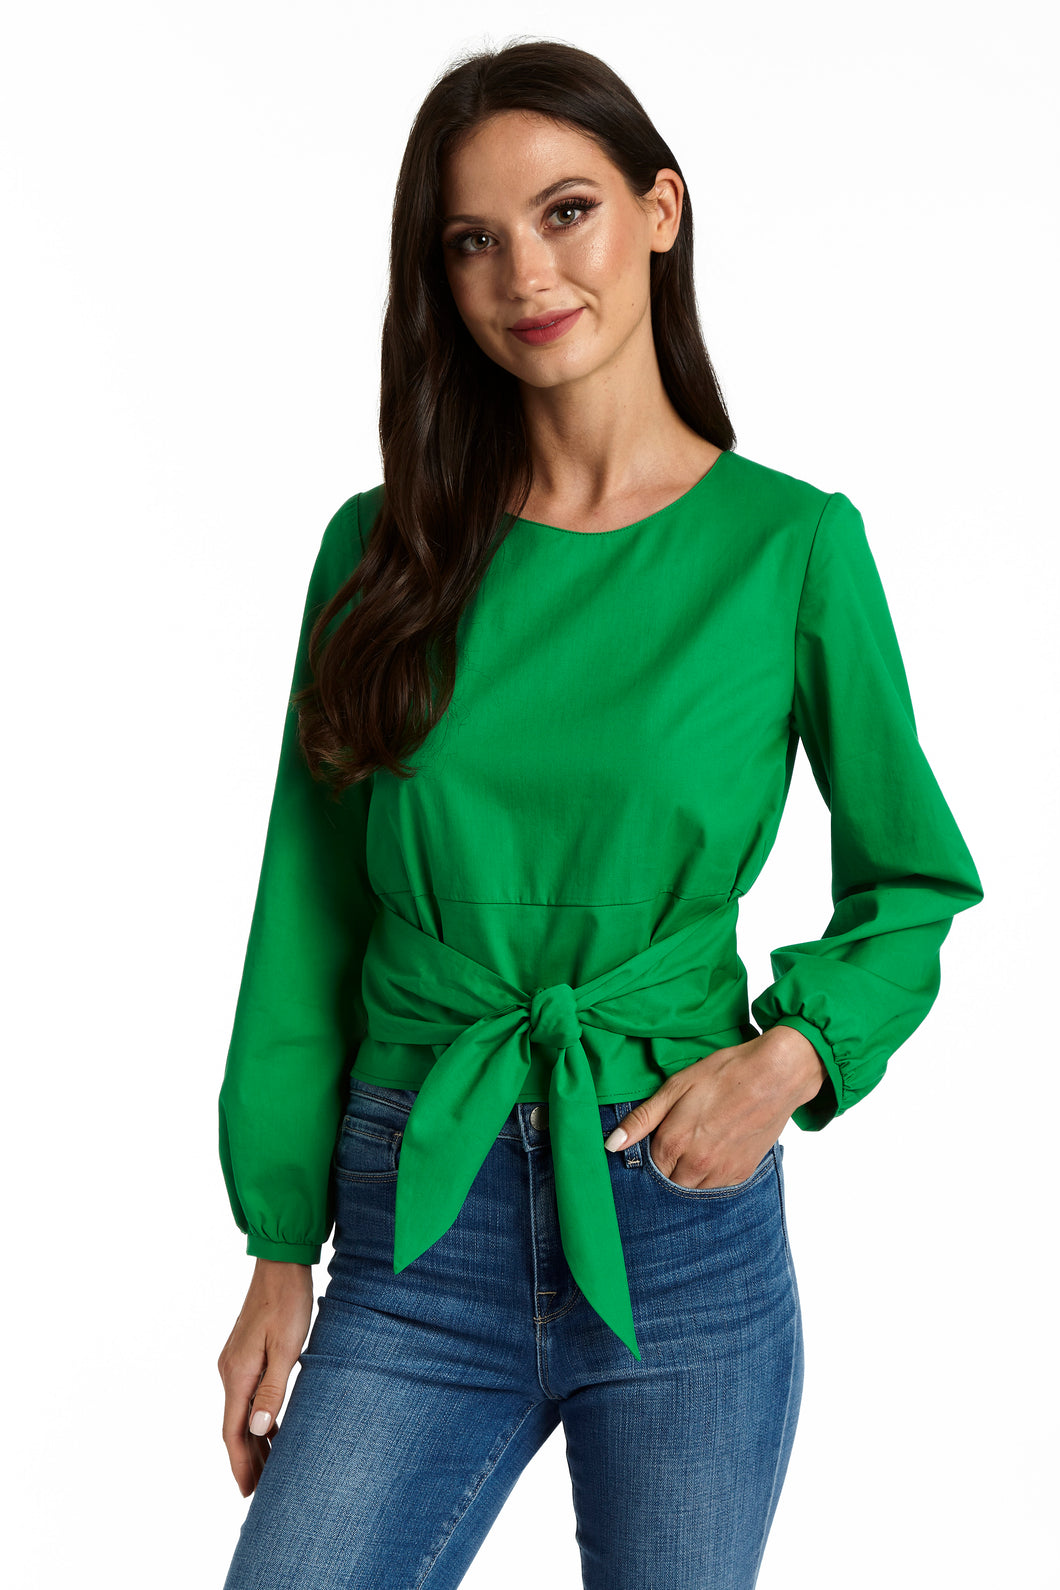 Drew Philips Claire Top in Kelly Green with Long Sleeve and Tie